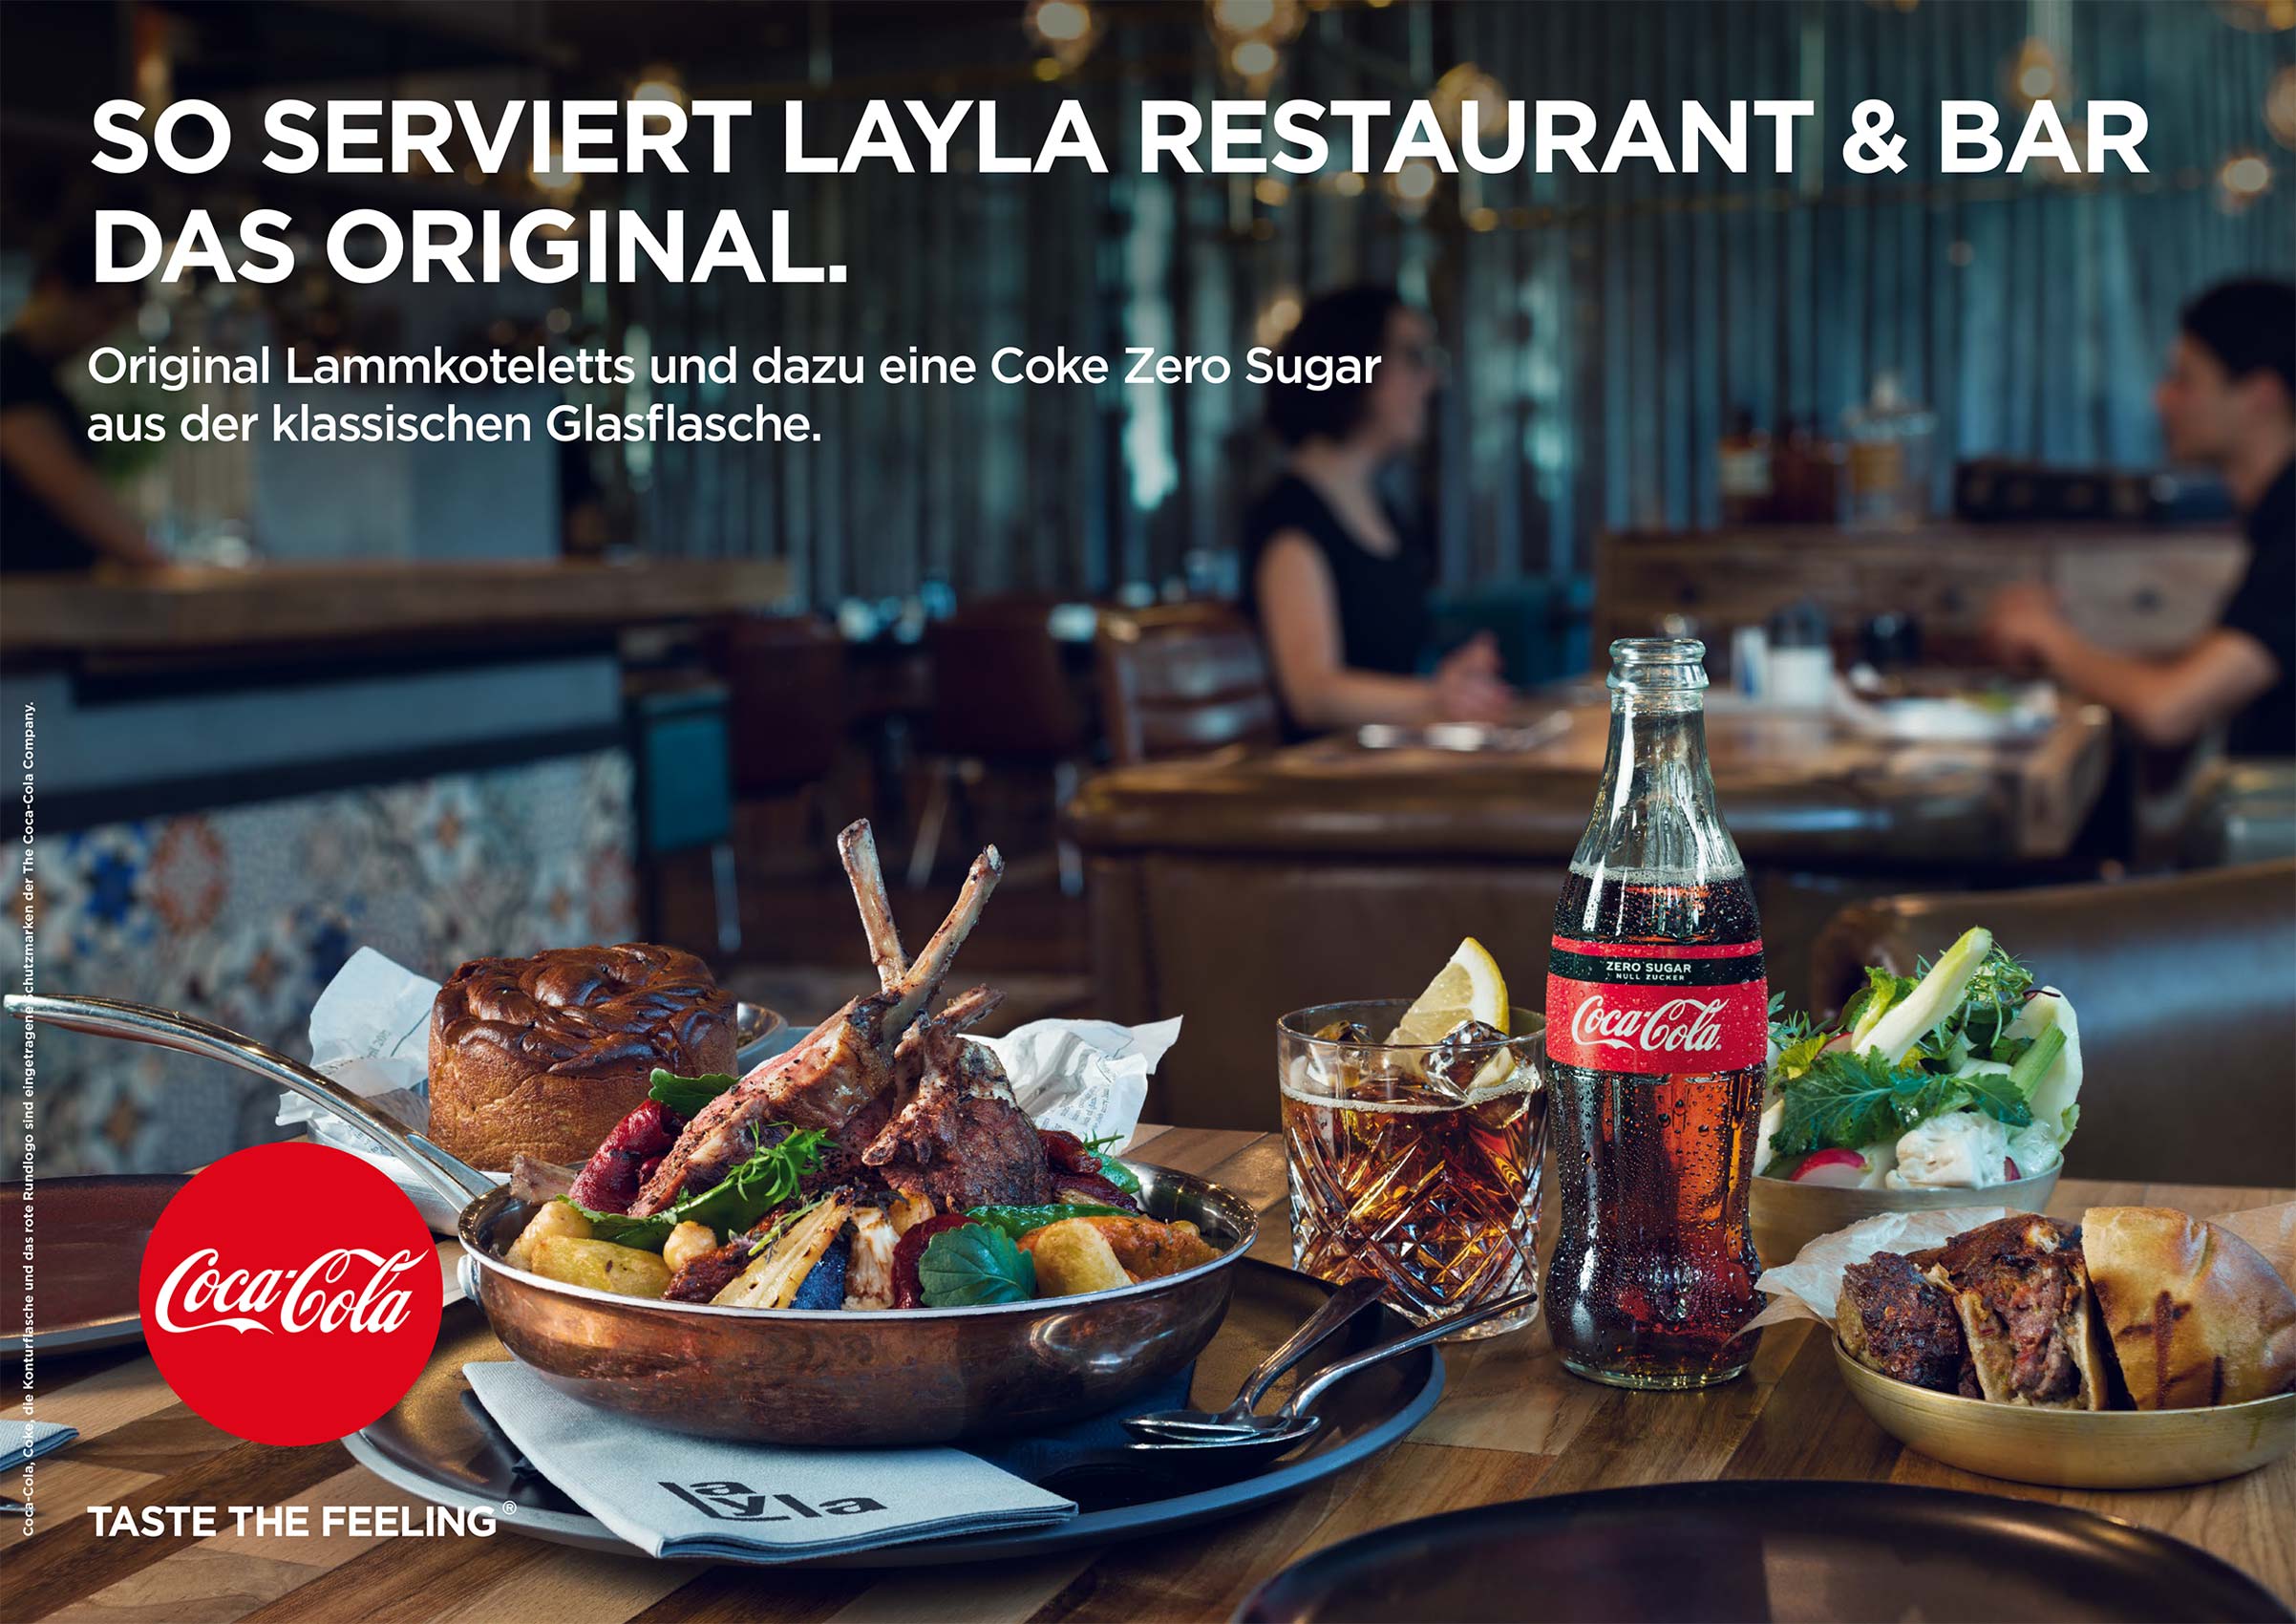 Israeli food and coca-cola on a table in restaurant Layla Berlin 